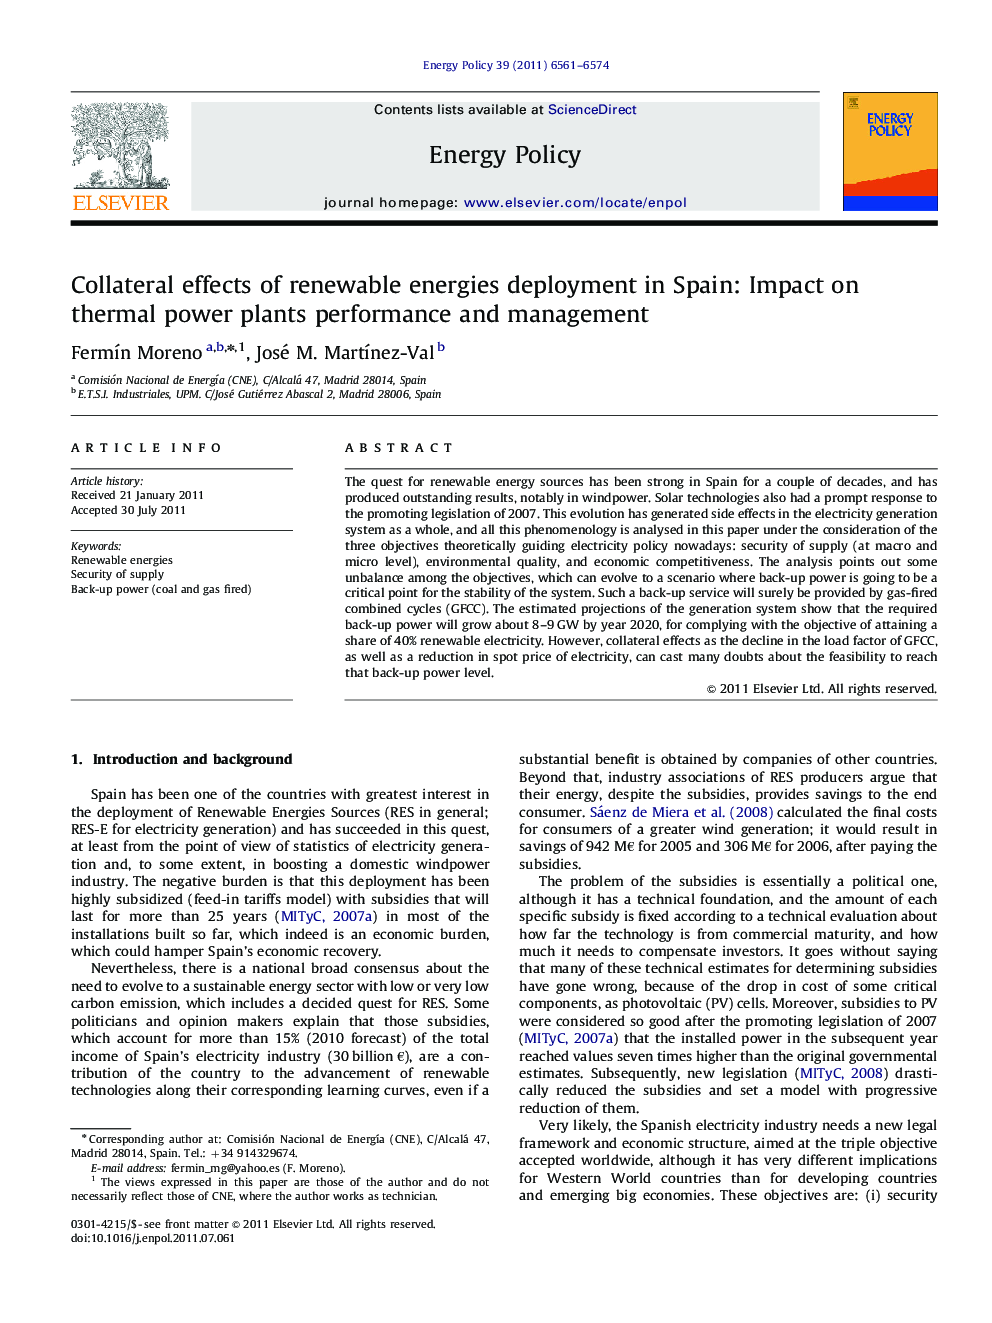 Collateral effects of renewable energies deployment in Spain: Impact on thermal power plants performance and management